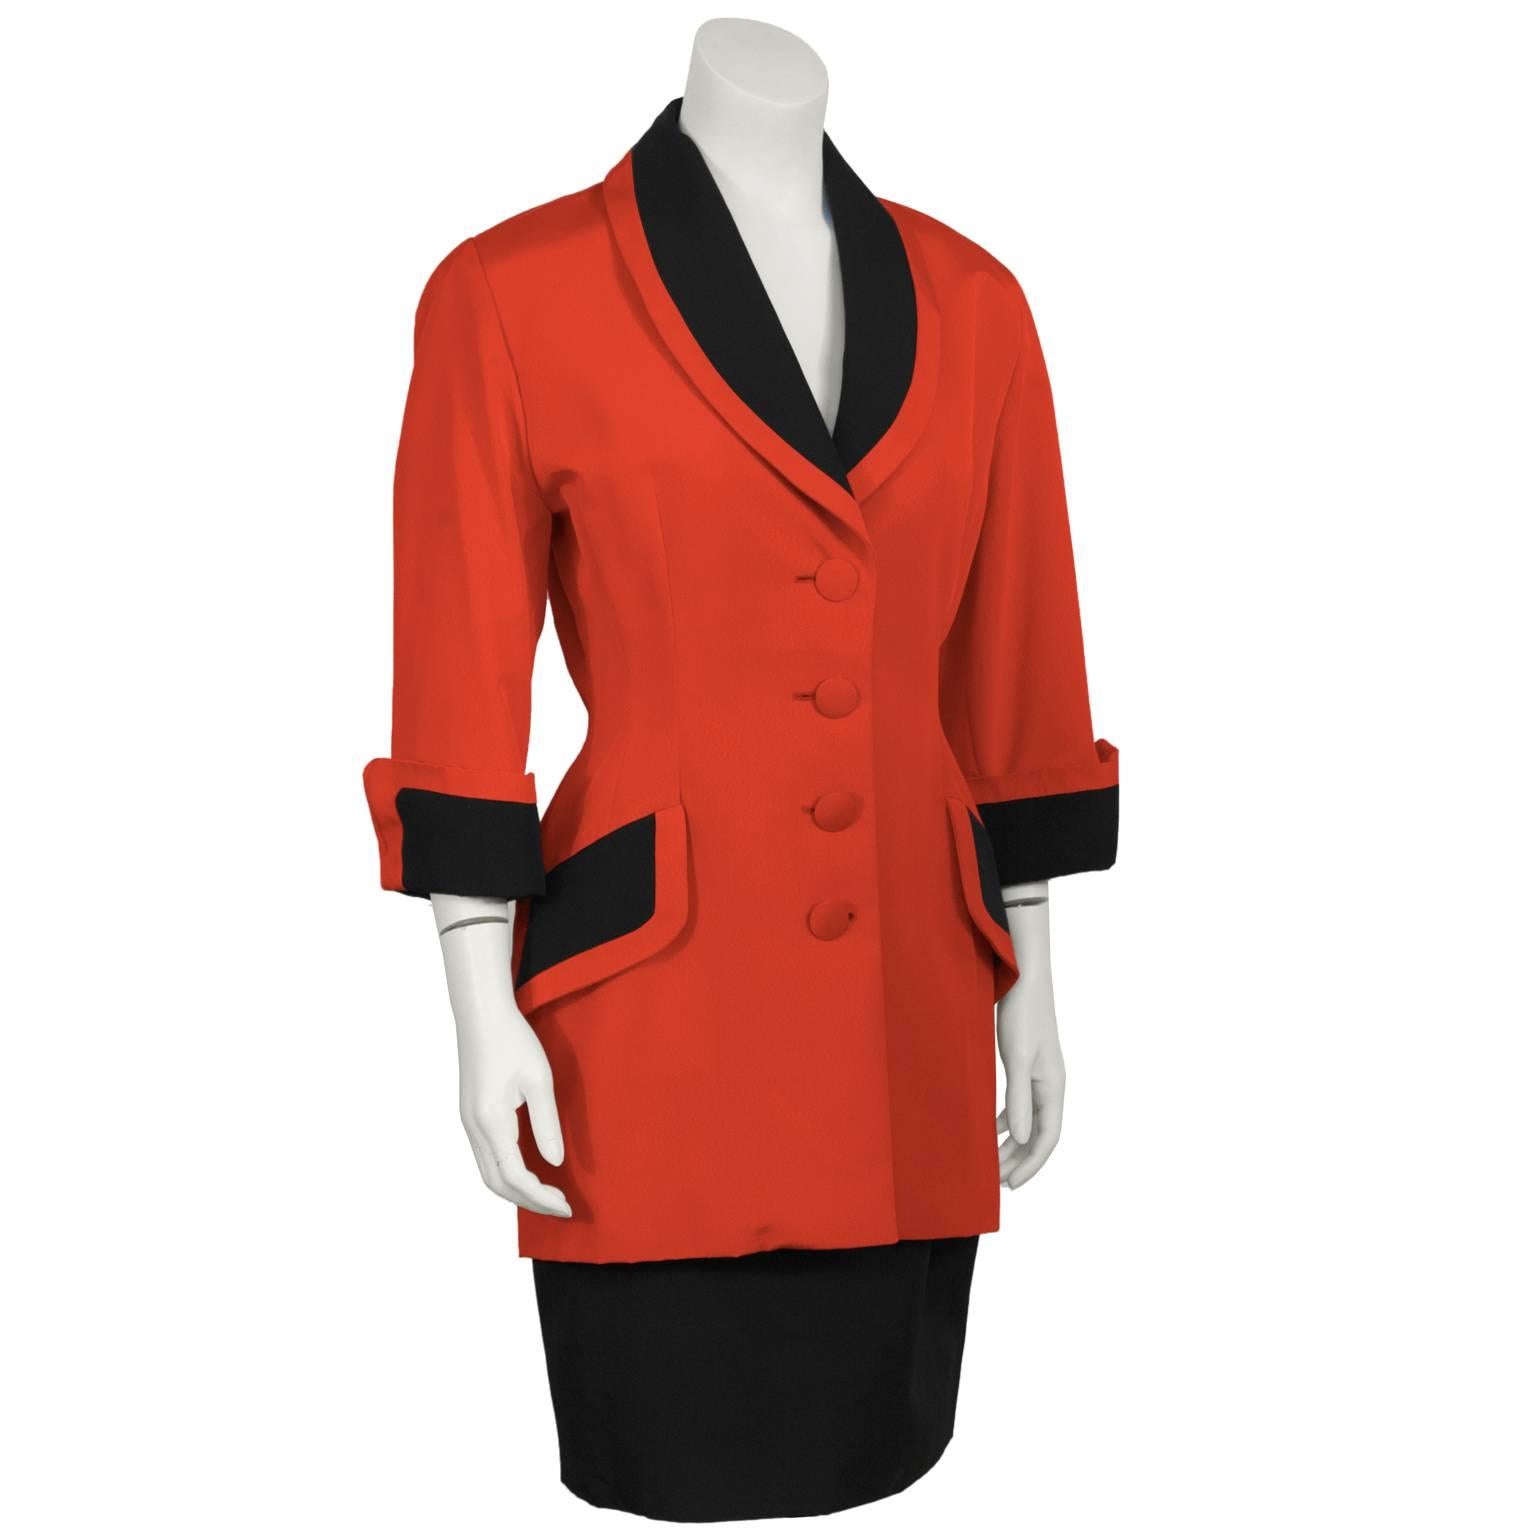 Isabelle Allard red skirt suit from the 1980's. The red jacket is fitted through the waist and features a black lapel, cuffs and pocket flaps. Covered red buttons down the front and the jacket falls to below the hip. The black skirt is meant to be